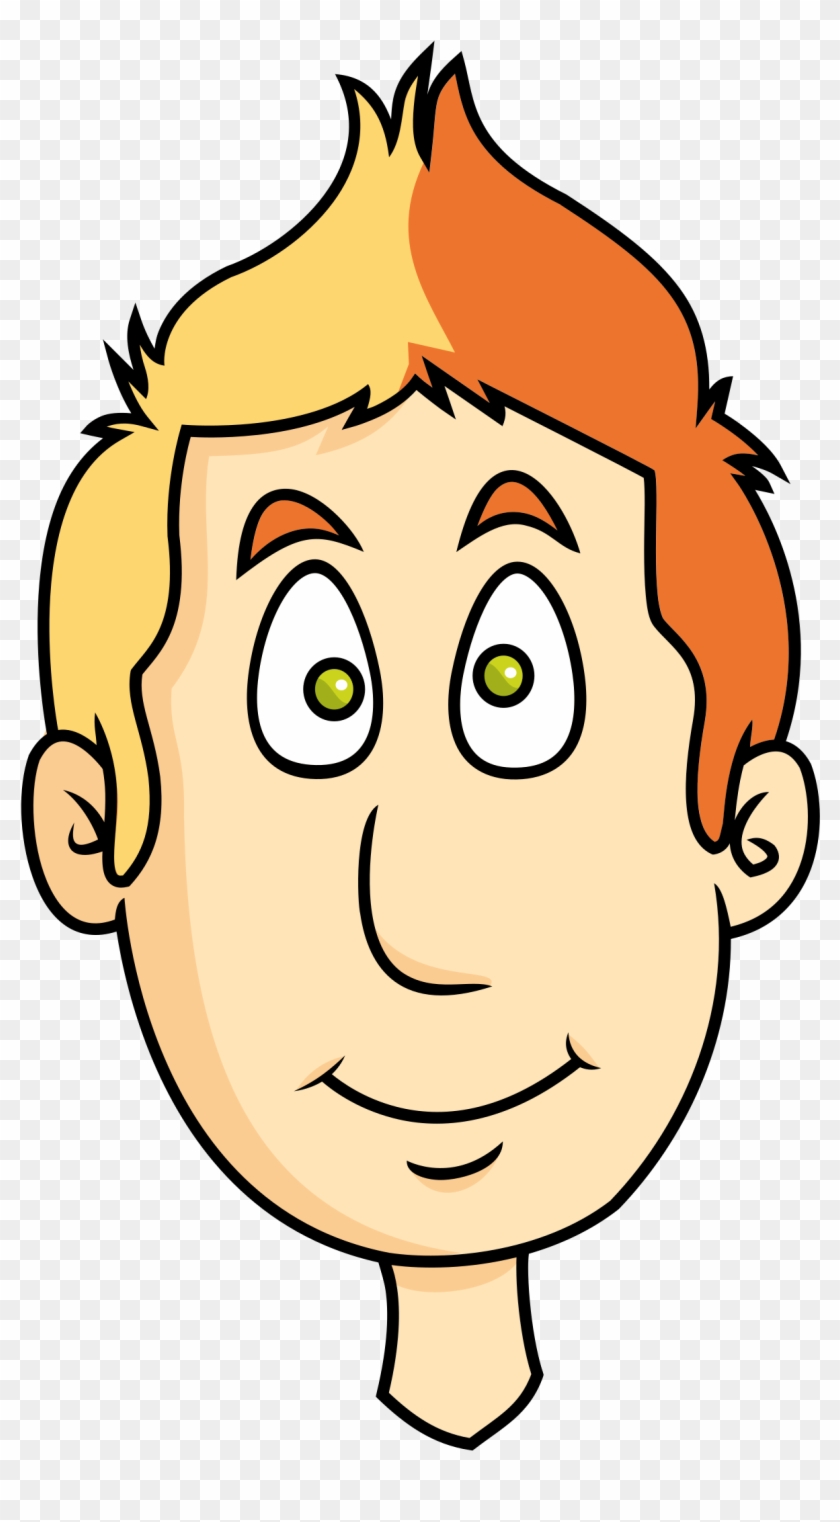 Log In Sign Up Upload Clipart - Teen Face Cartoon #778844